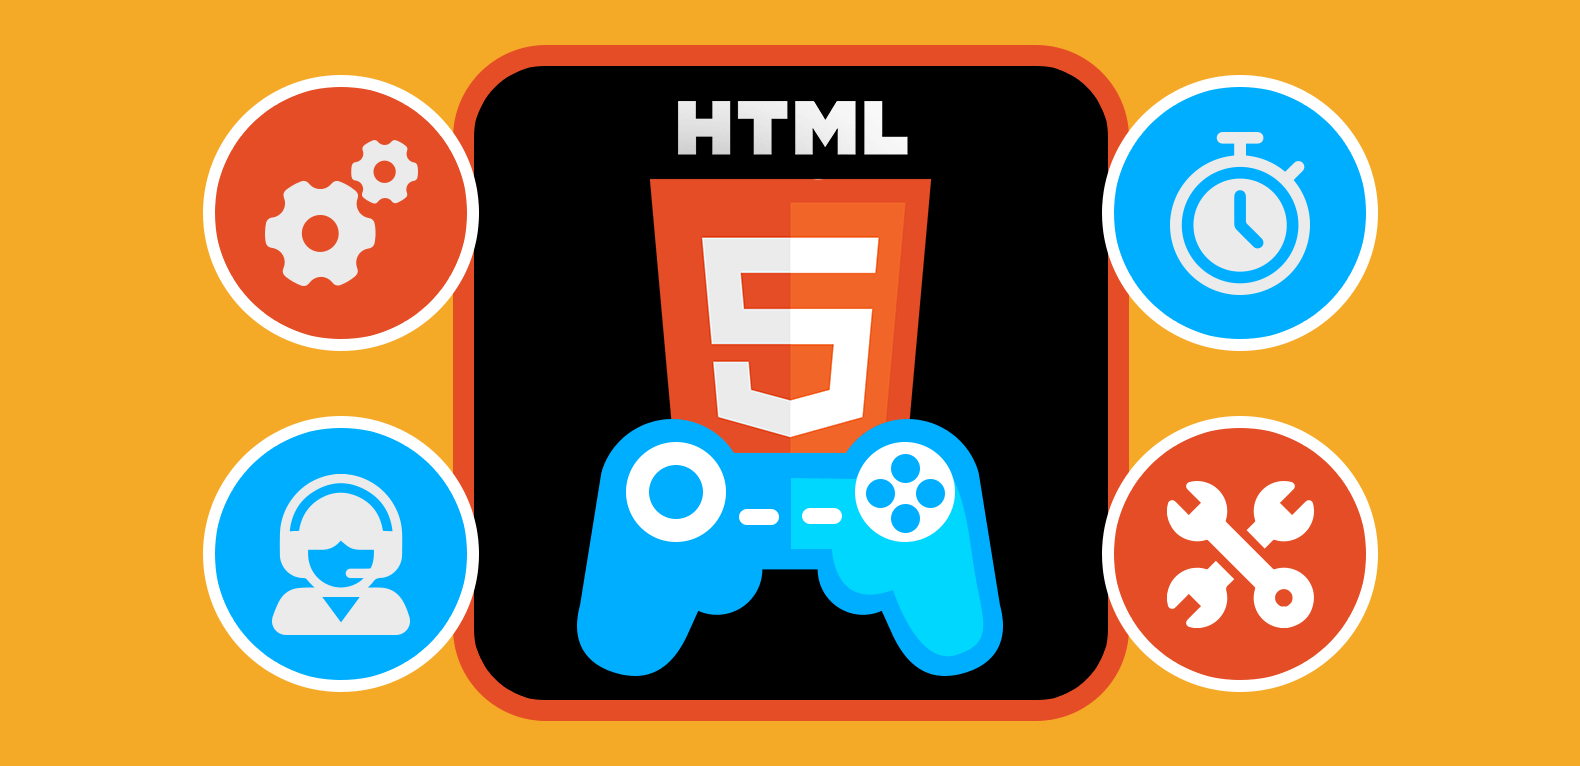 HTML5 GAMES